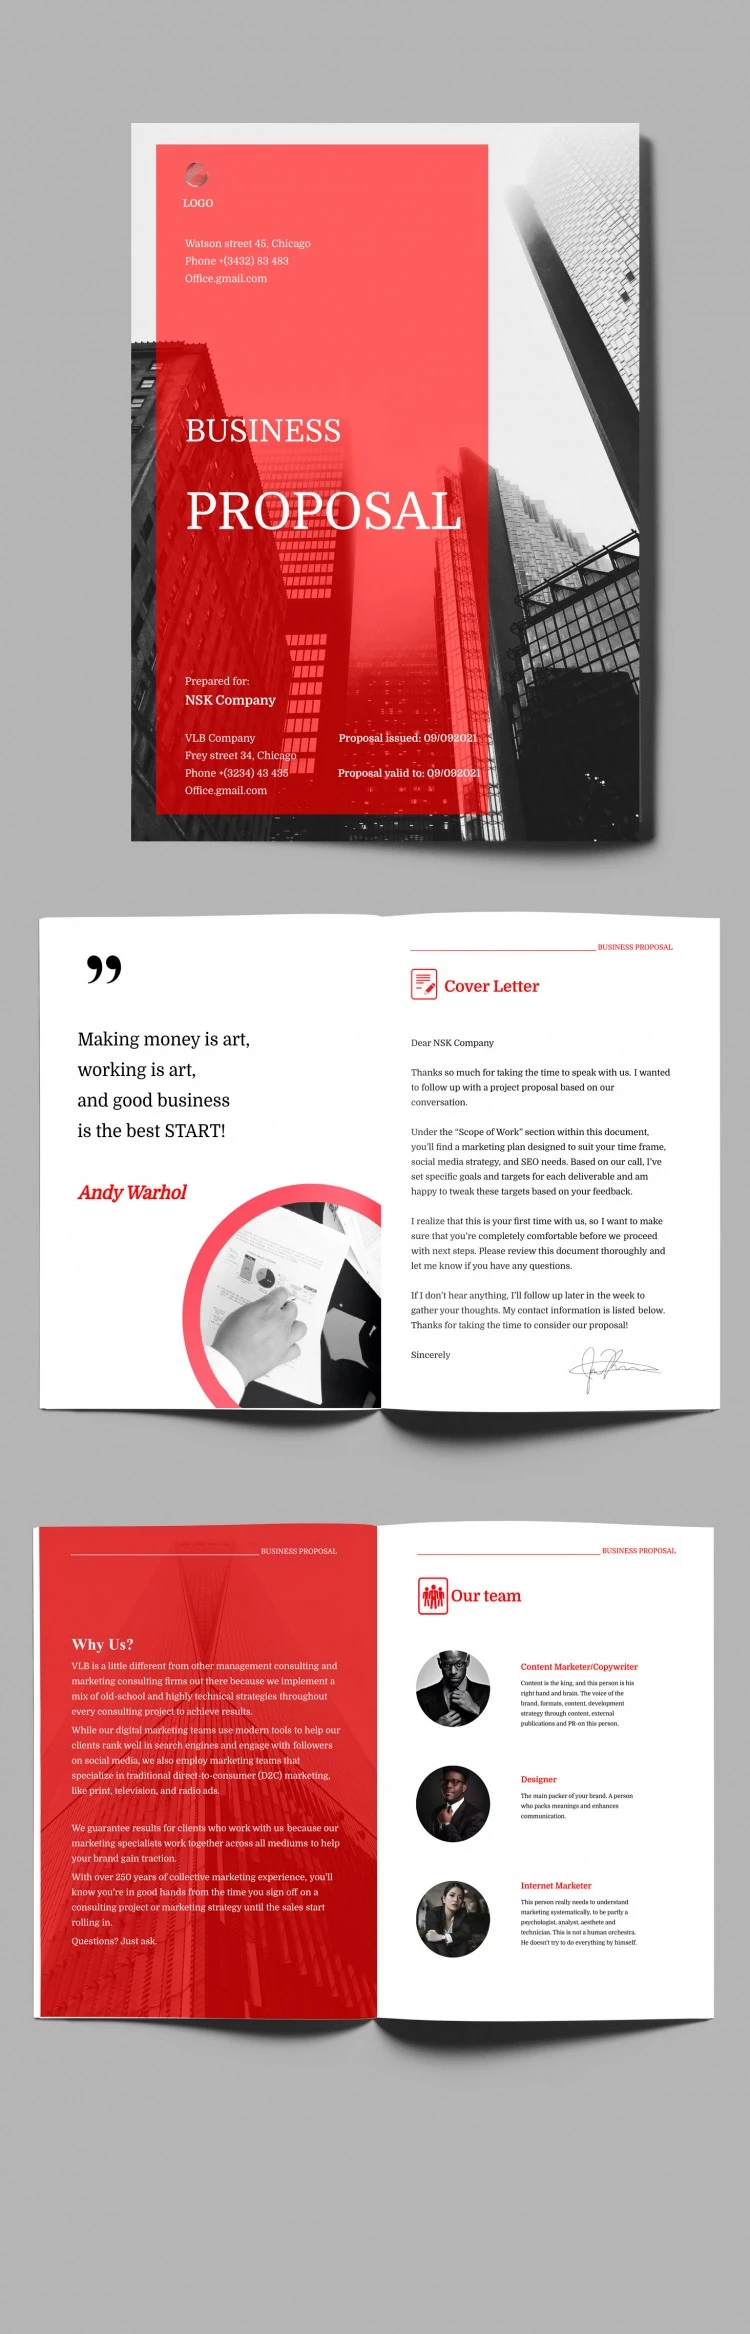 Red Professional Business Proposal - free Google Docs Template - 10061833